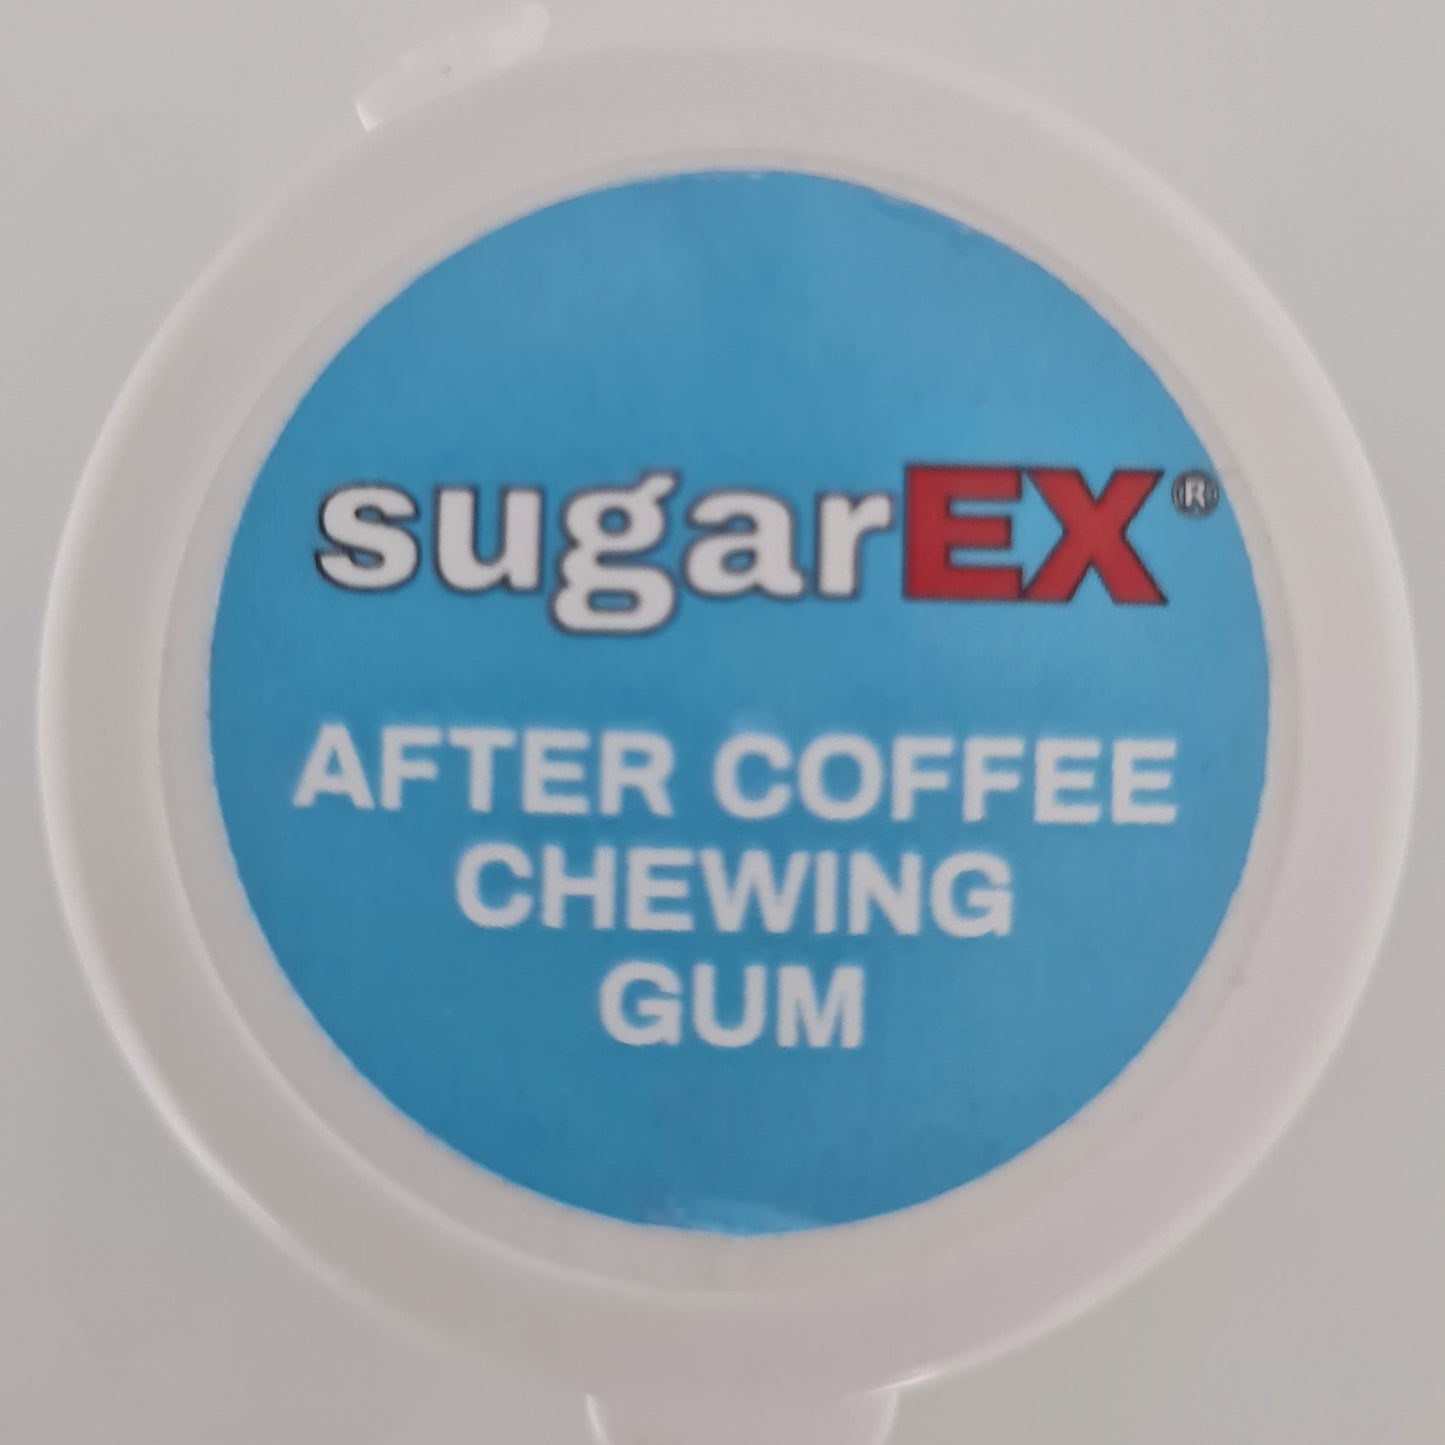 A kick of freshness after your coffee: taste it you`ll love it!
sugarEX After Coffee Chewing Gum Mint (70g per can) - sold in a set of 5 cans